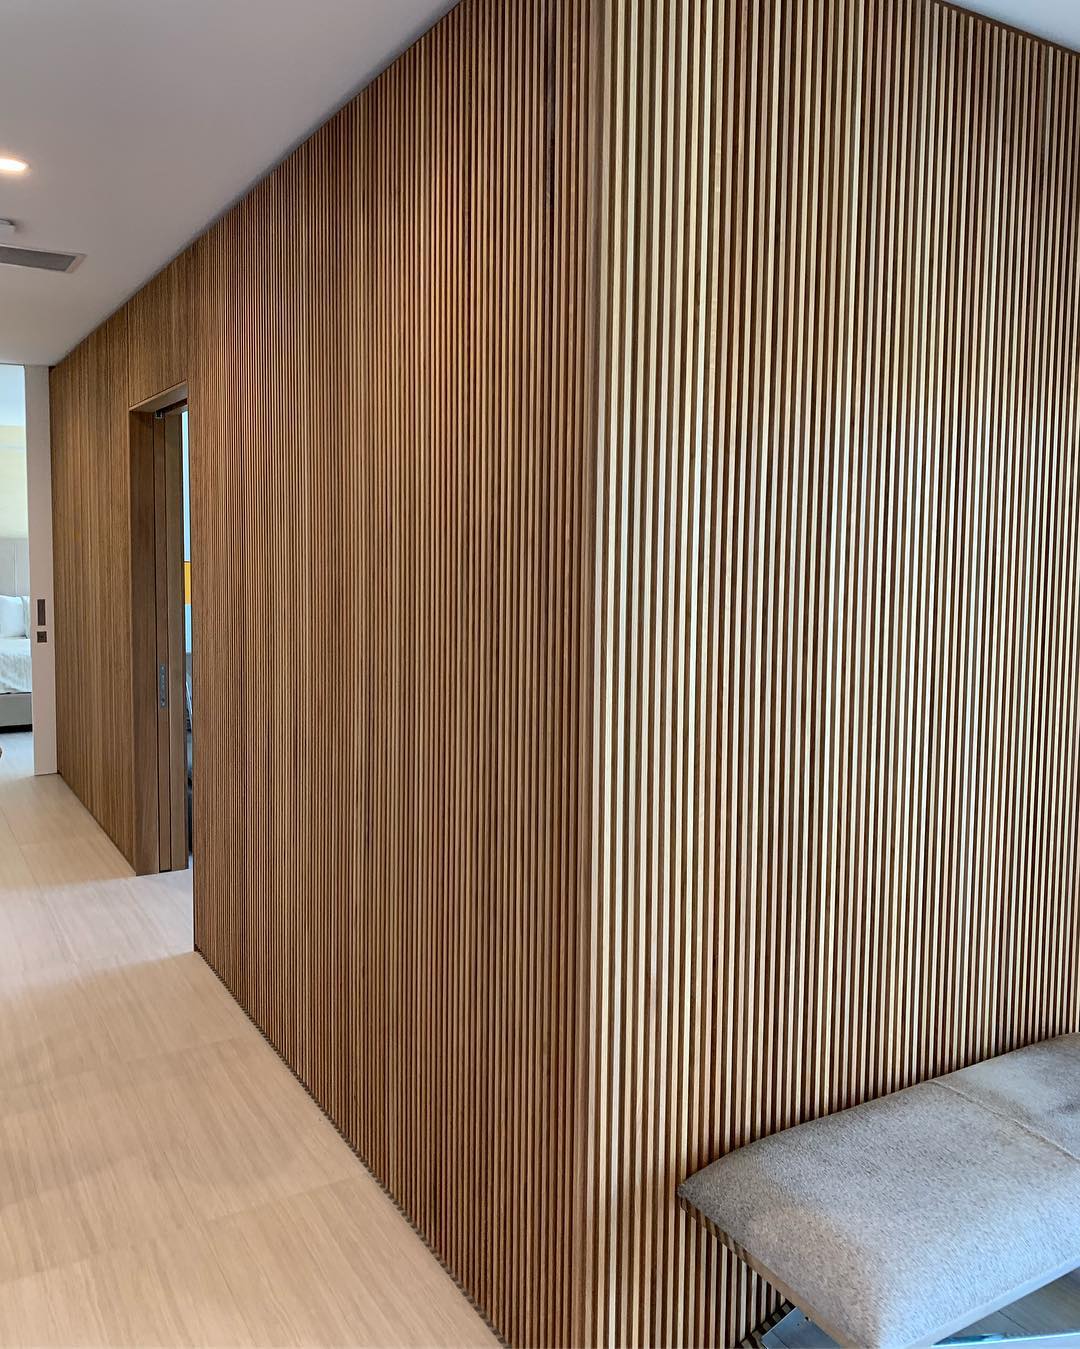 Simple yet complex white oak slat wall details. Designed by @dc_architecture Built by @foursquarebuilders and @flitchatx